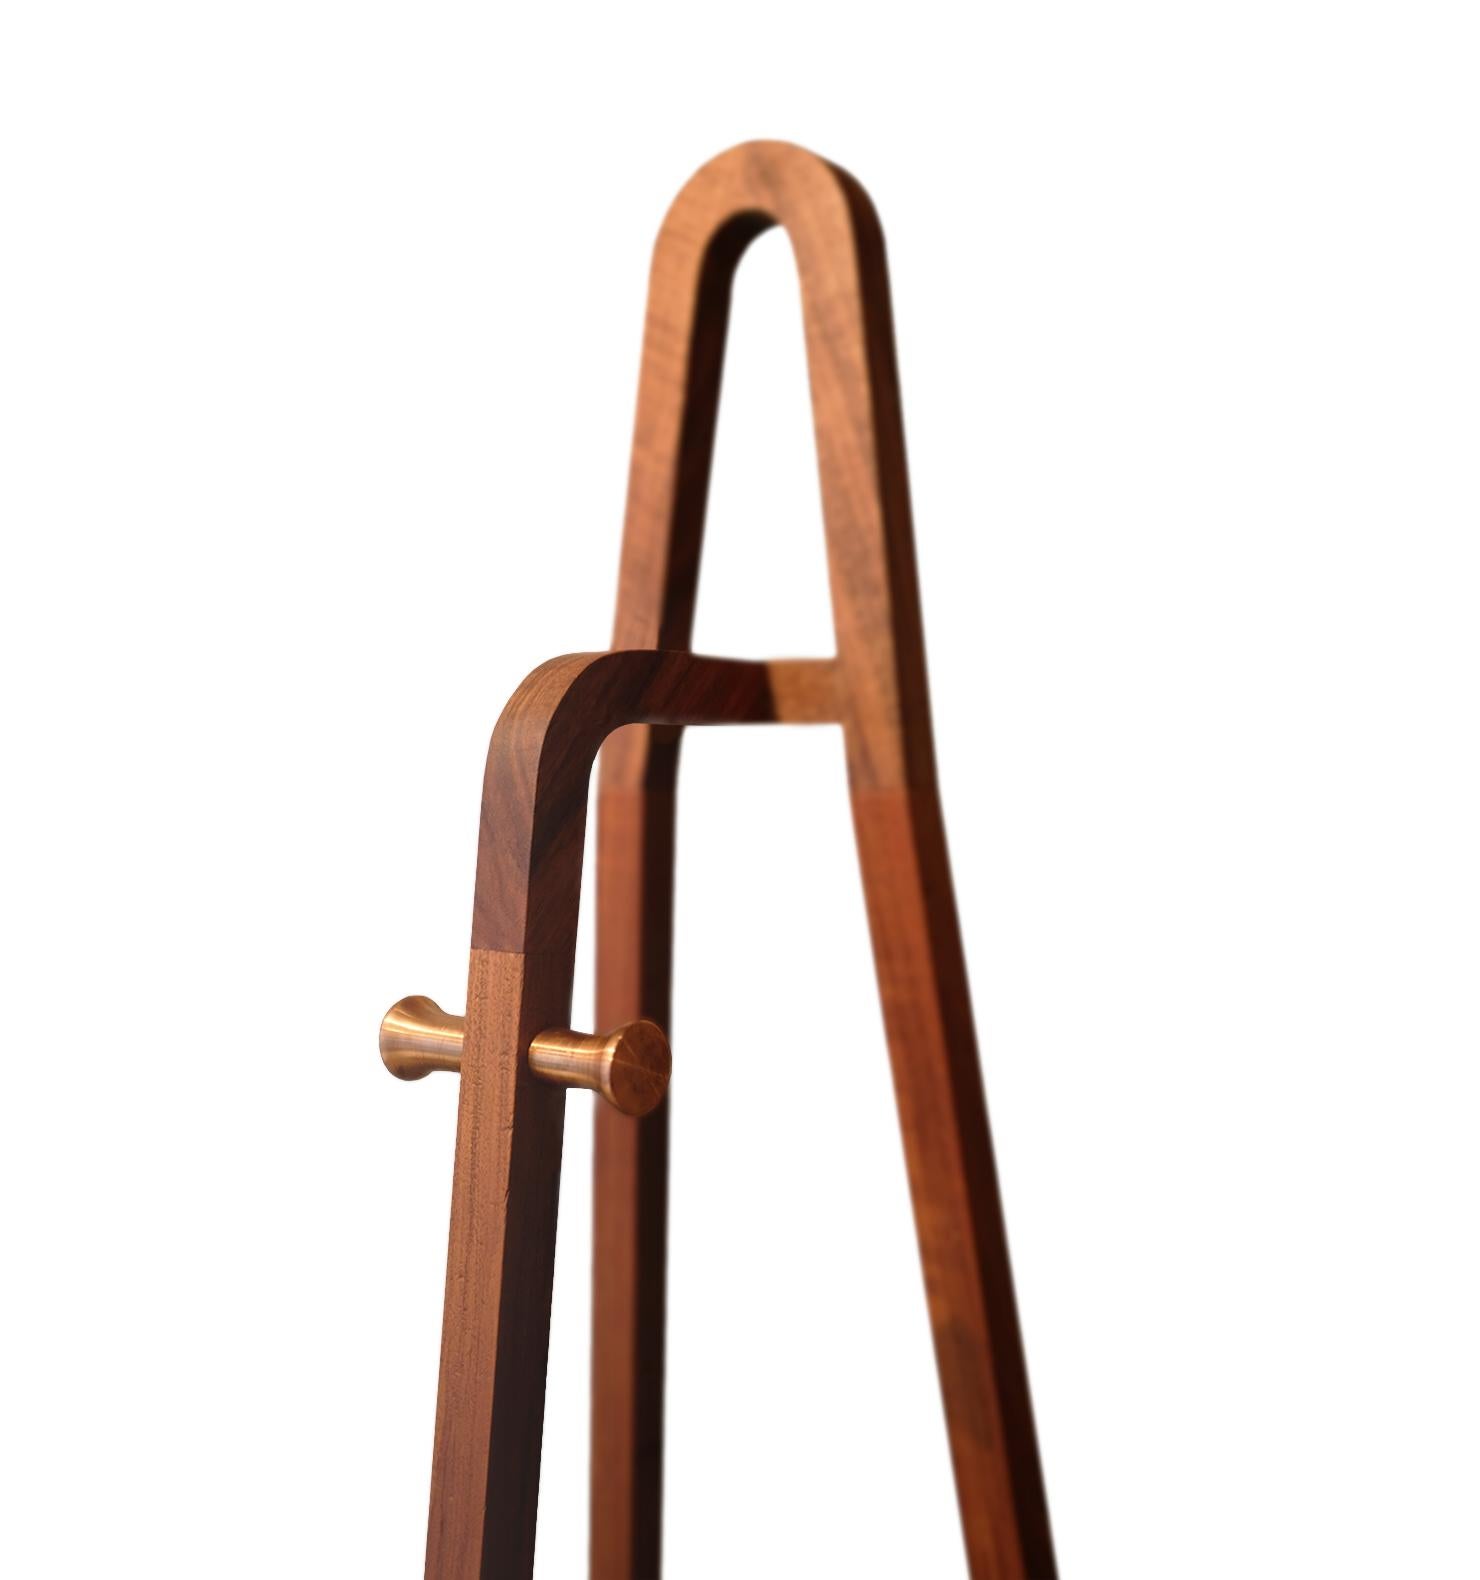 The Tono G Coat Stand is a remarkable addition to the Tono line, crafted from solid wood and featuring the iconic curves that define the collection. This coat stand is designed to seamlessly fit into any space, offering both functionality and a